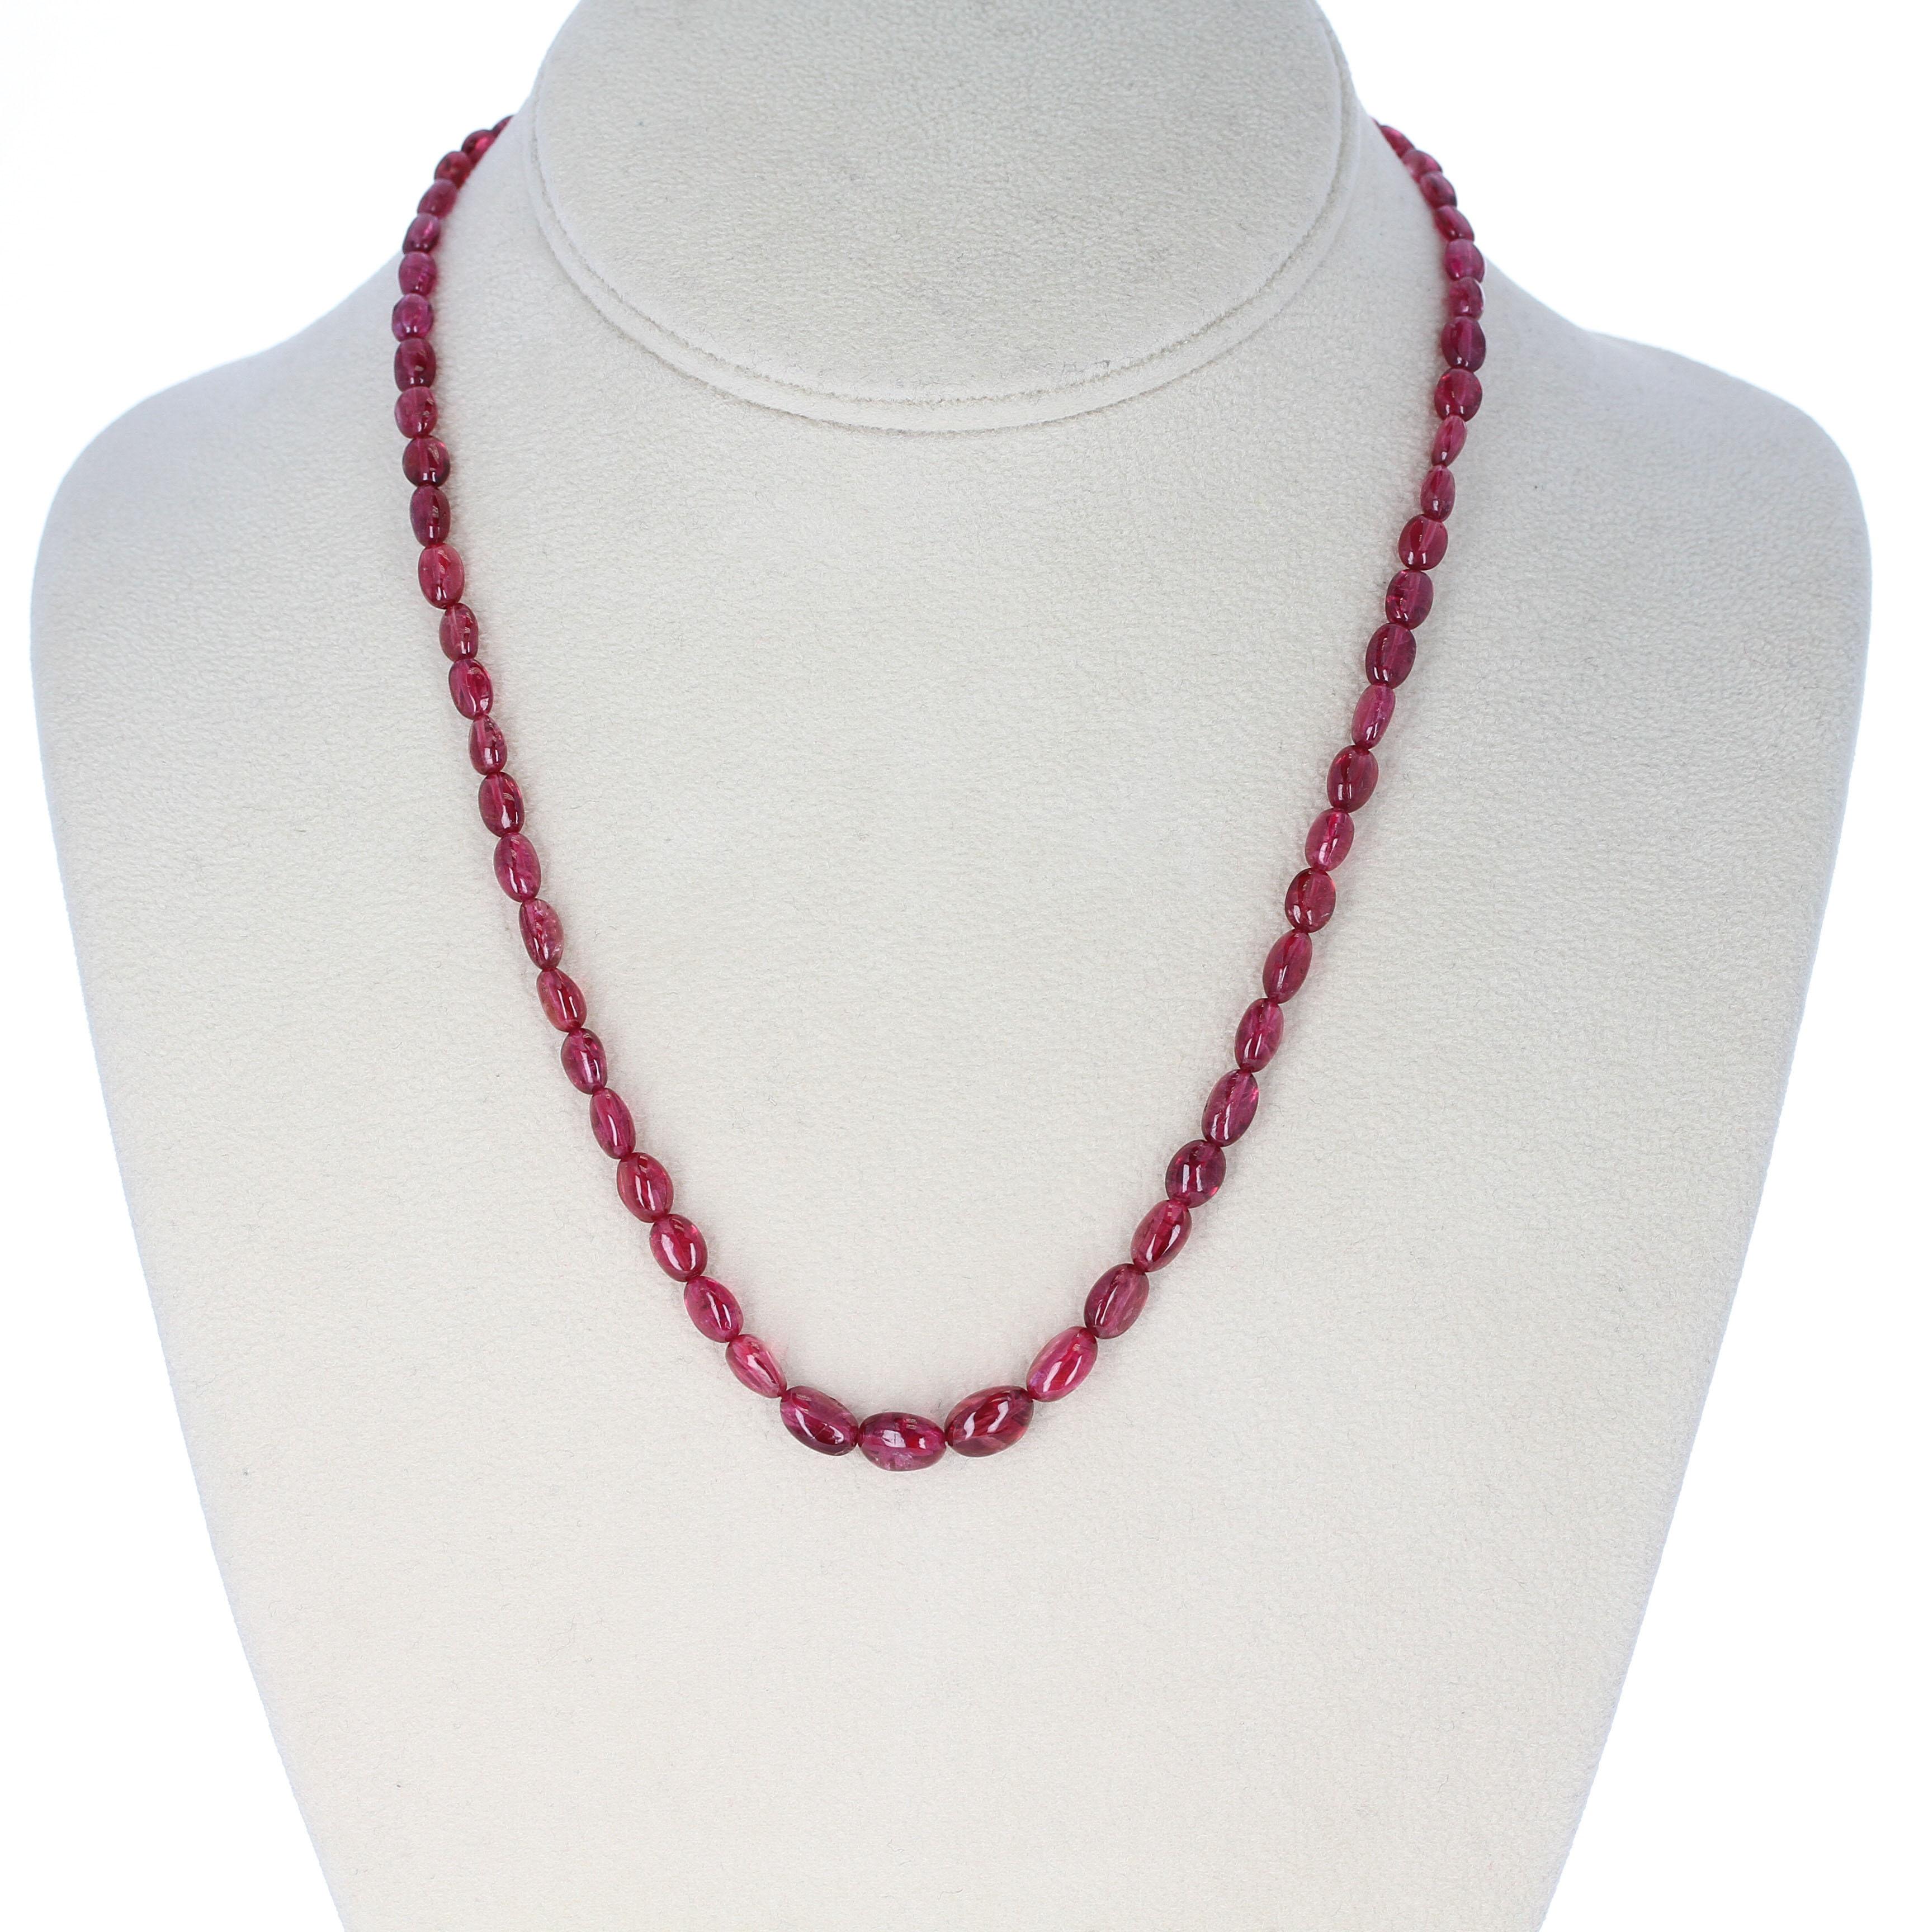 A strand of Spinel Smooth Tumbled Beads with a Sterling Silver Toggle Clasp. Length: 17.75